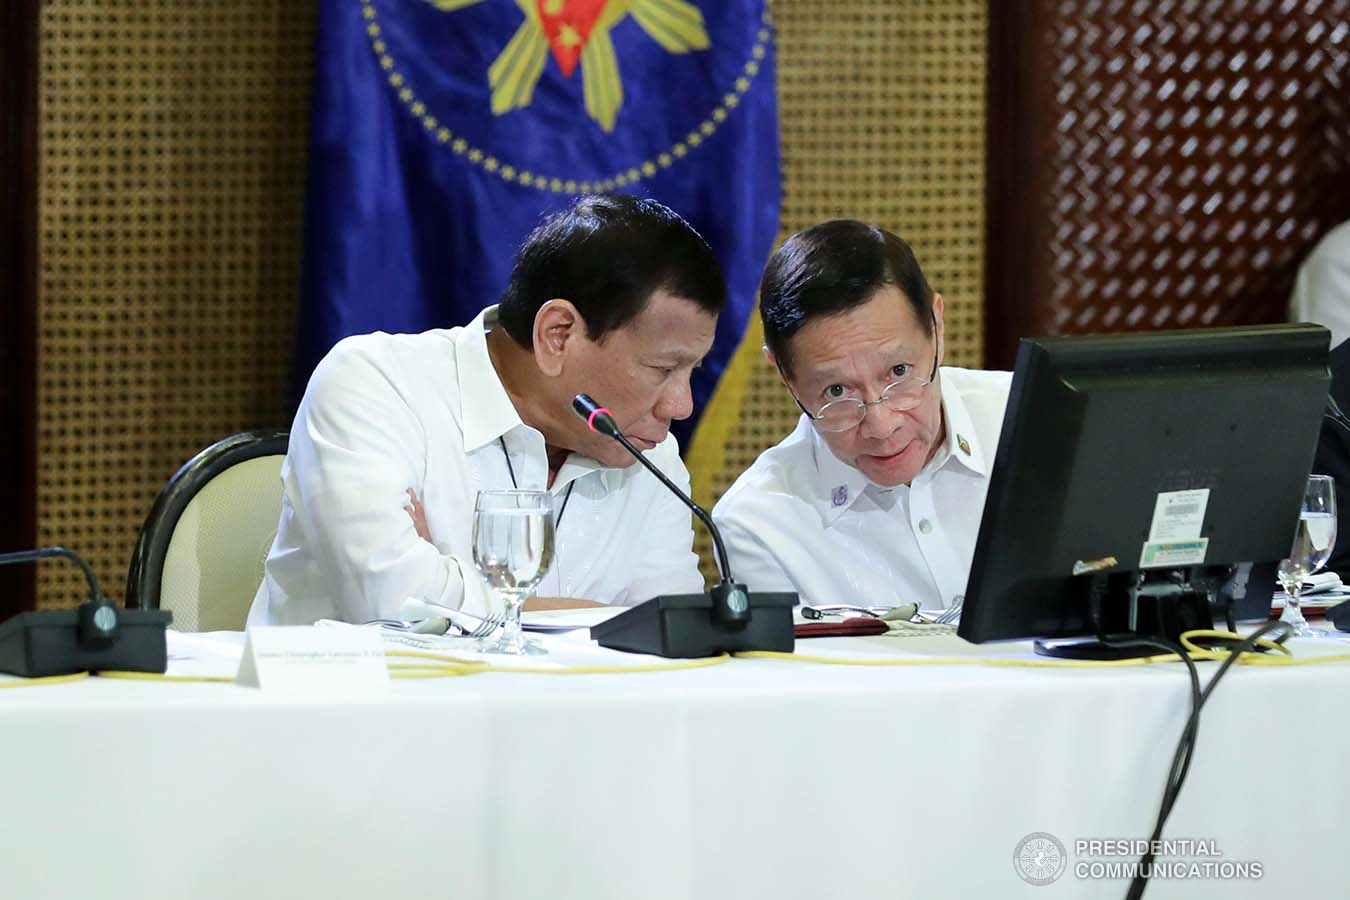 President Rodrigo Roa Duterte confers with Health Secretary Francisco Duque III while holding a meeting with the Inter-Agency Task Force for the Management of Emerging Infectious Diseases at the Malacañan Palace on March 9, 2020.